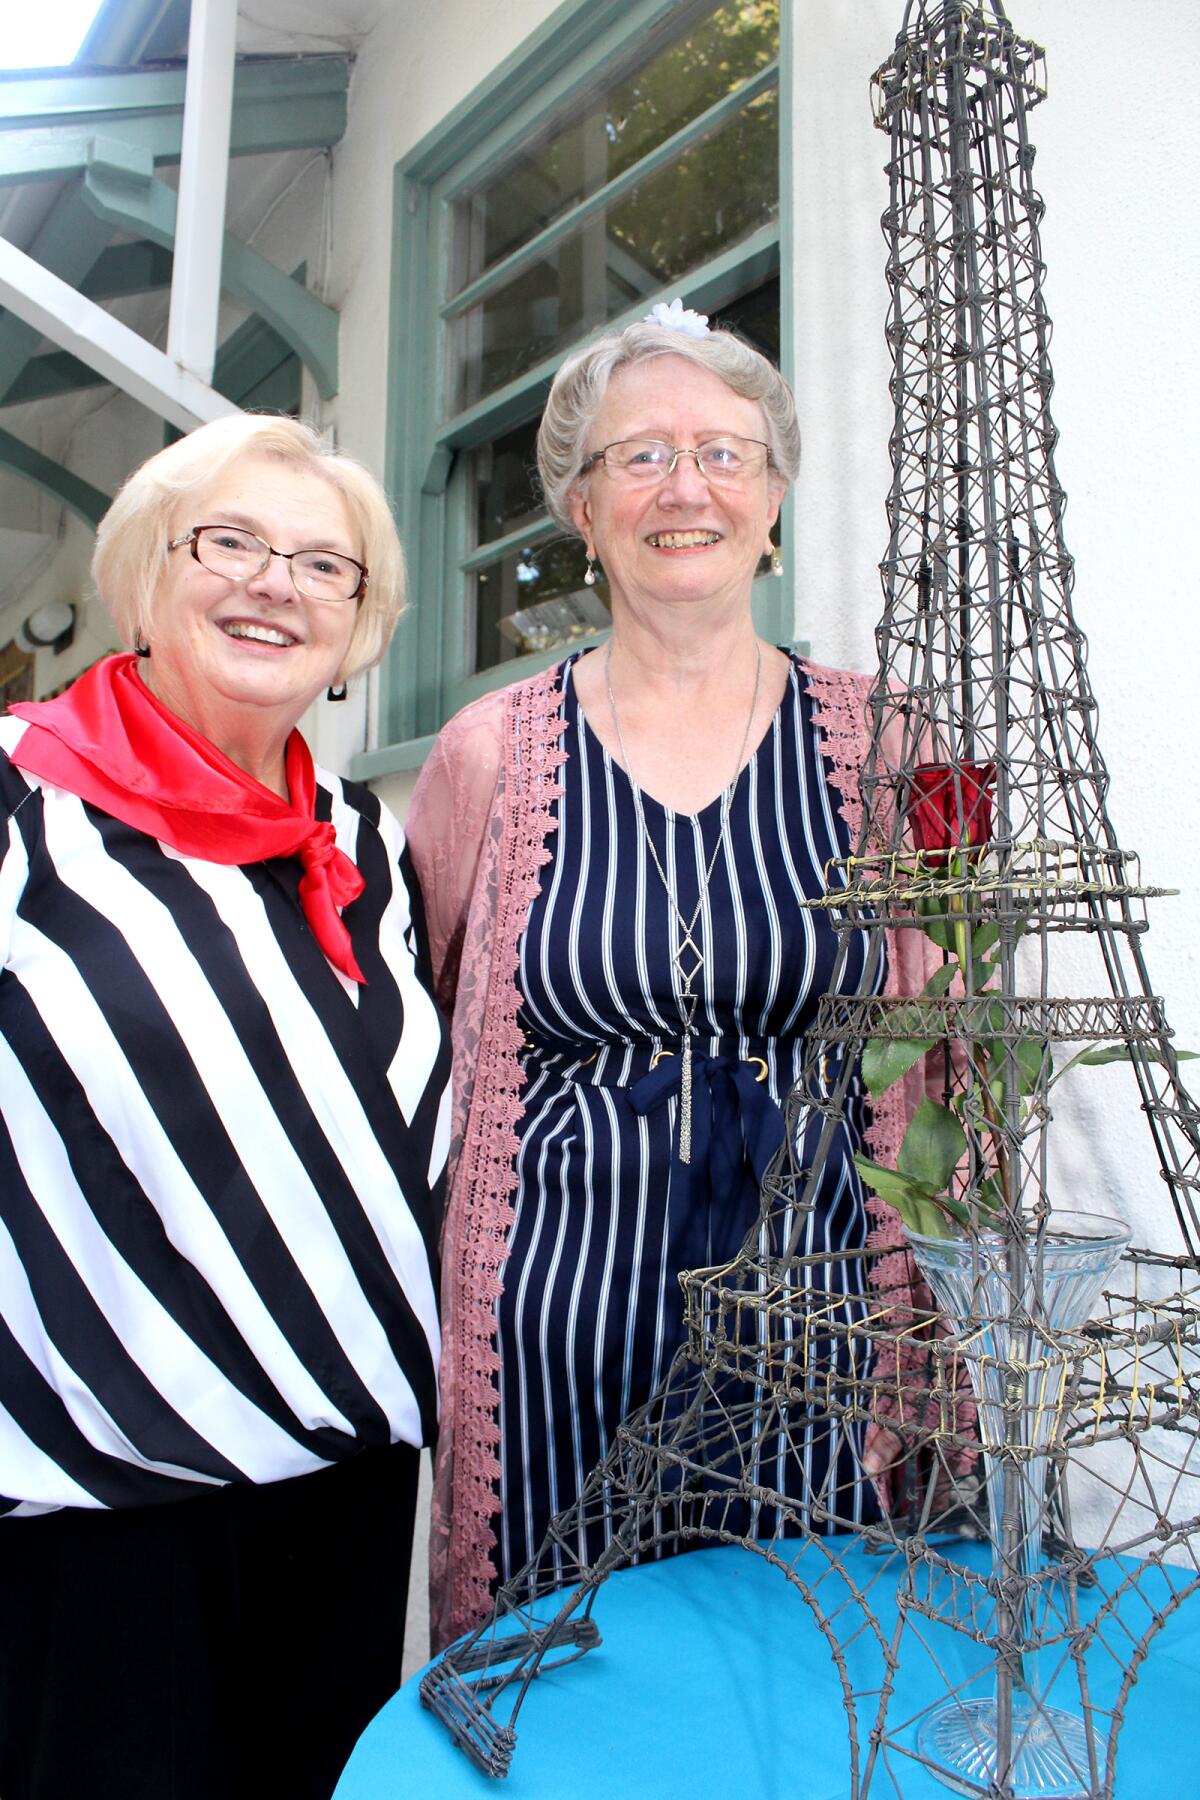 Altrusa’s own Eiffel Tower is graced by member Pat Zayas, left, and Barbara Crawford, Altrusa president.